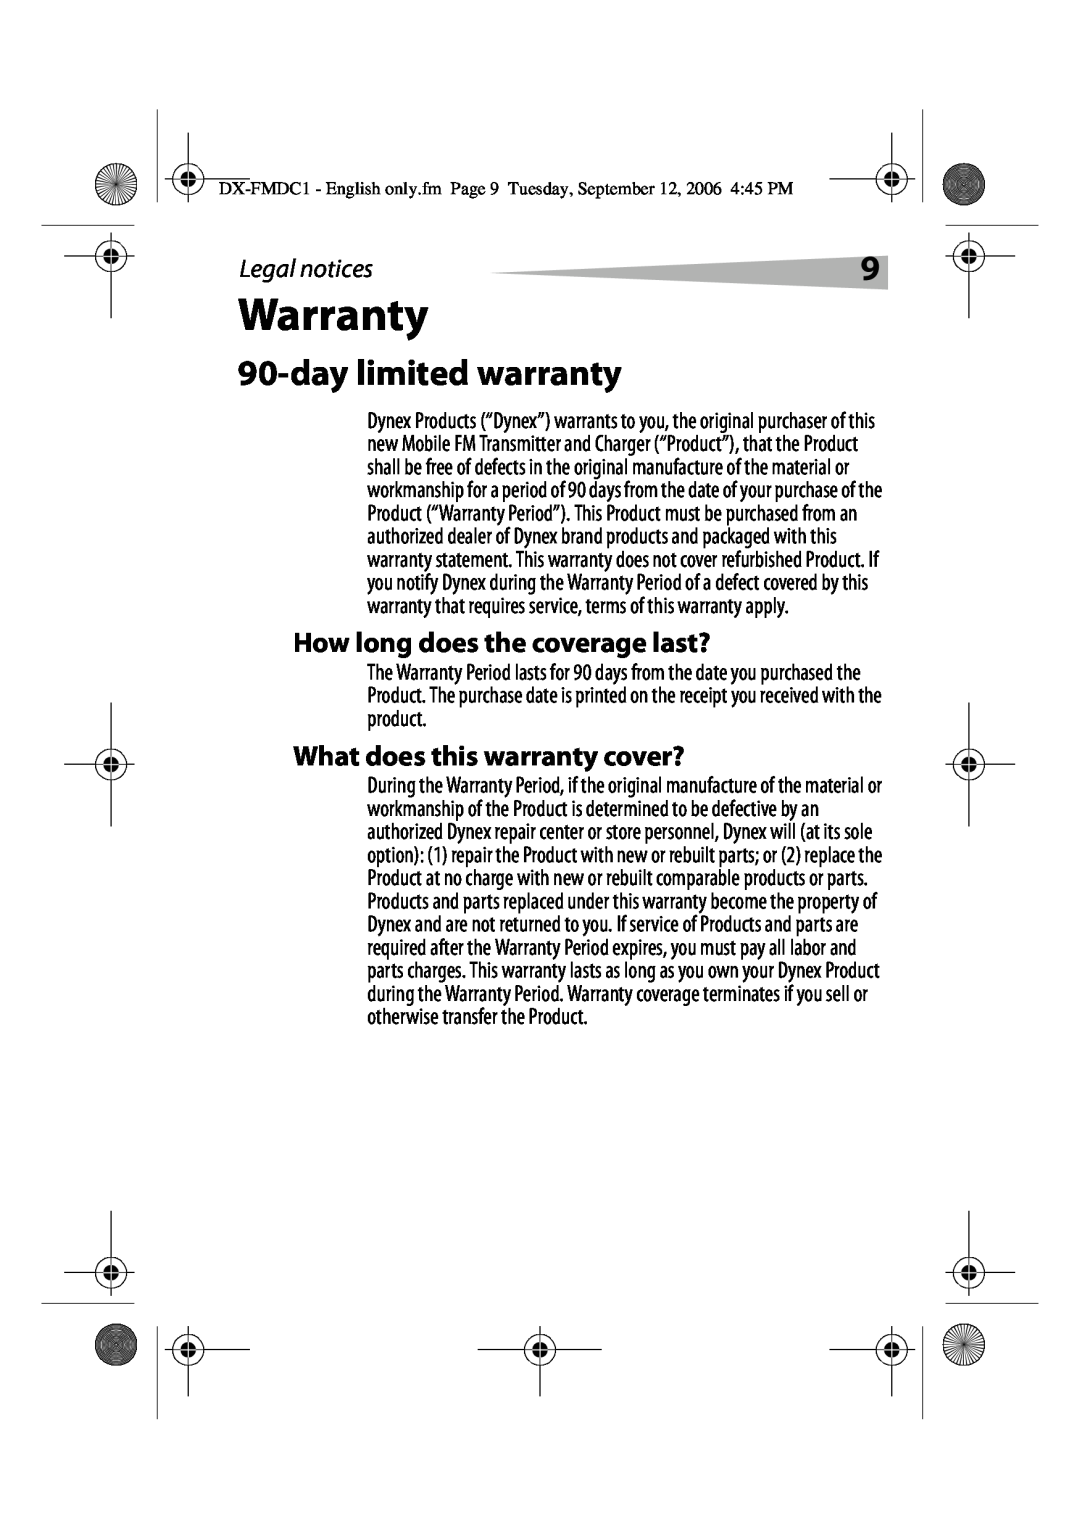 Dynex DX-FMDC1 manual Warranty, daylimited warranty, How long does the coverage last?, What does this warranty cover? 